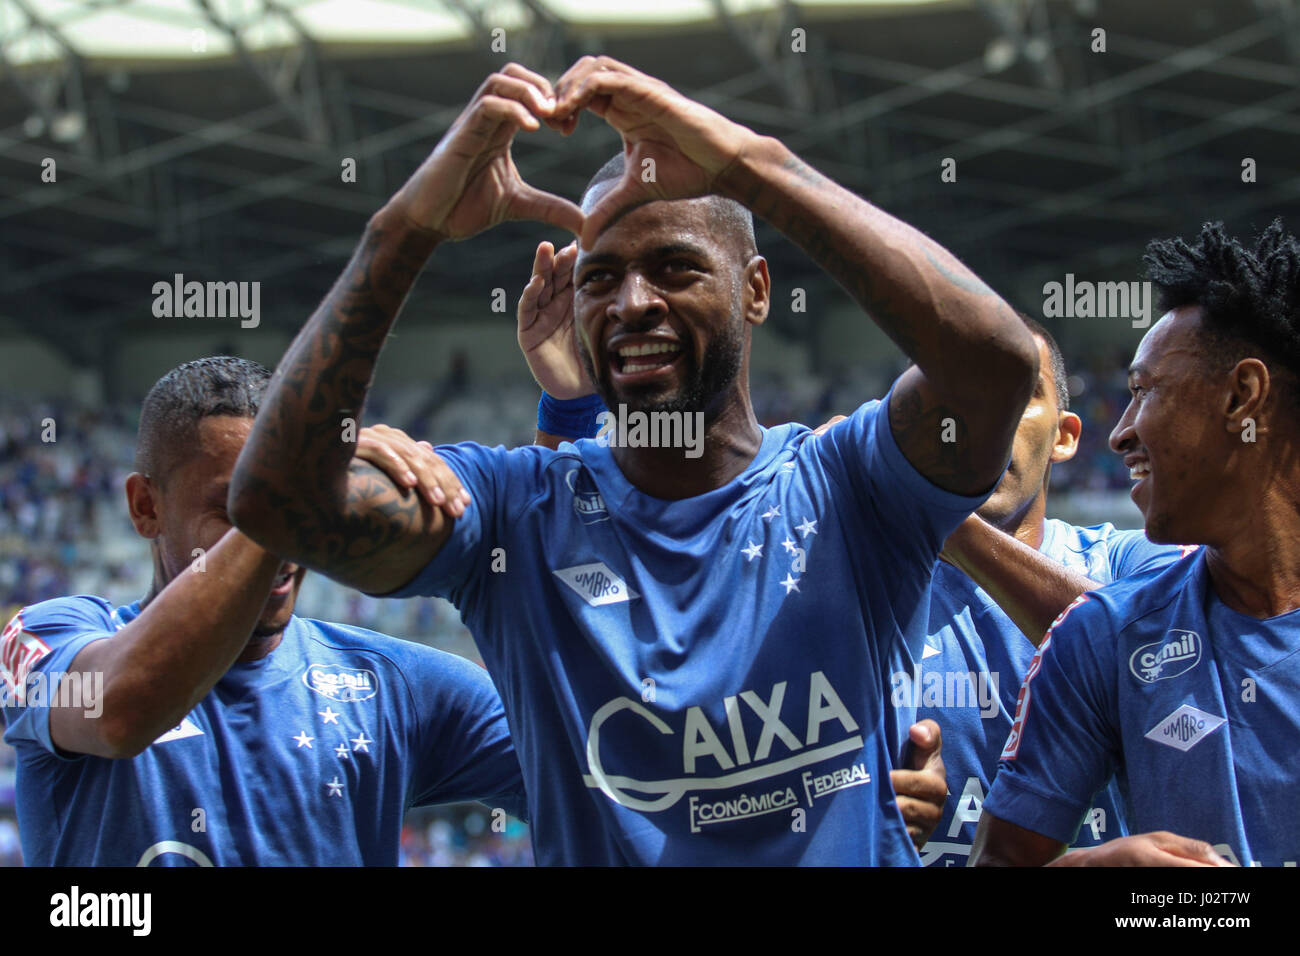 Dedé do Cruzeiro during match against the Democrat in a match valid for the eleventh round of the Mineiro Championship, at the Governador Magalhães Pinto Stadium, the Mineirão, in Belo Horizonte, on Sunday, 09. (PHOTO: DOUG PATRICIO/BRAZIL PHOTO PRESS) Stock Photo